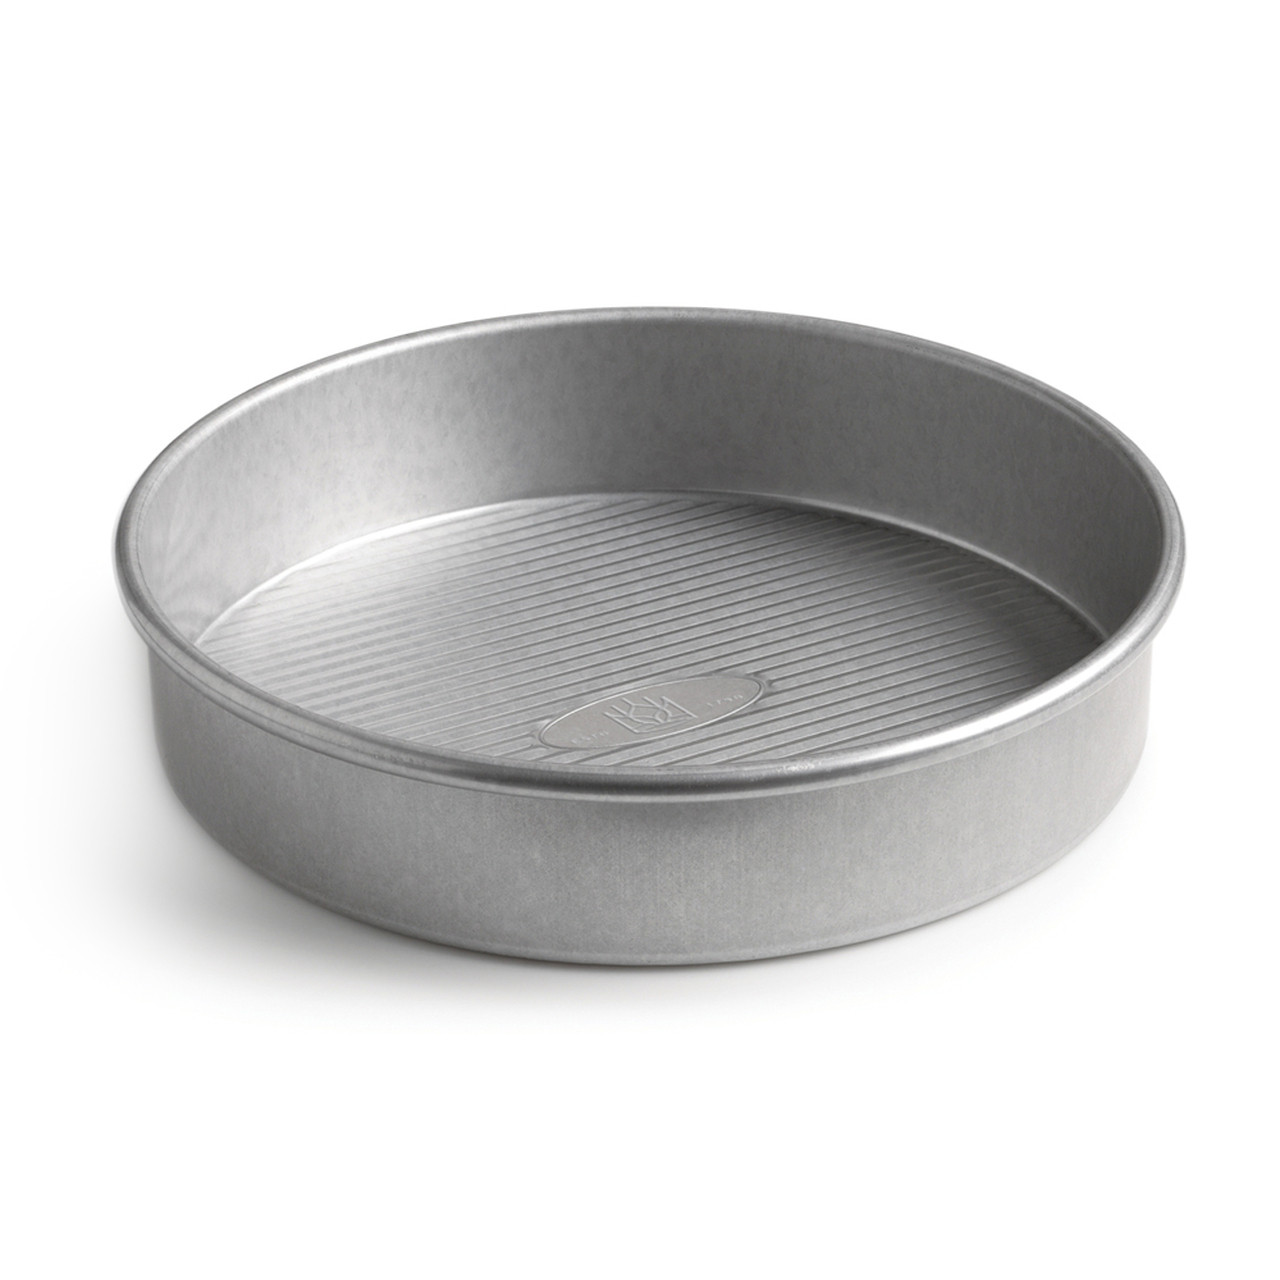 Oster Baker's Glee 9 Inch Aluminum Round Cake Pan in Silver - Walmart.com